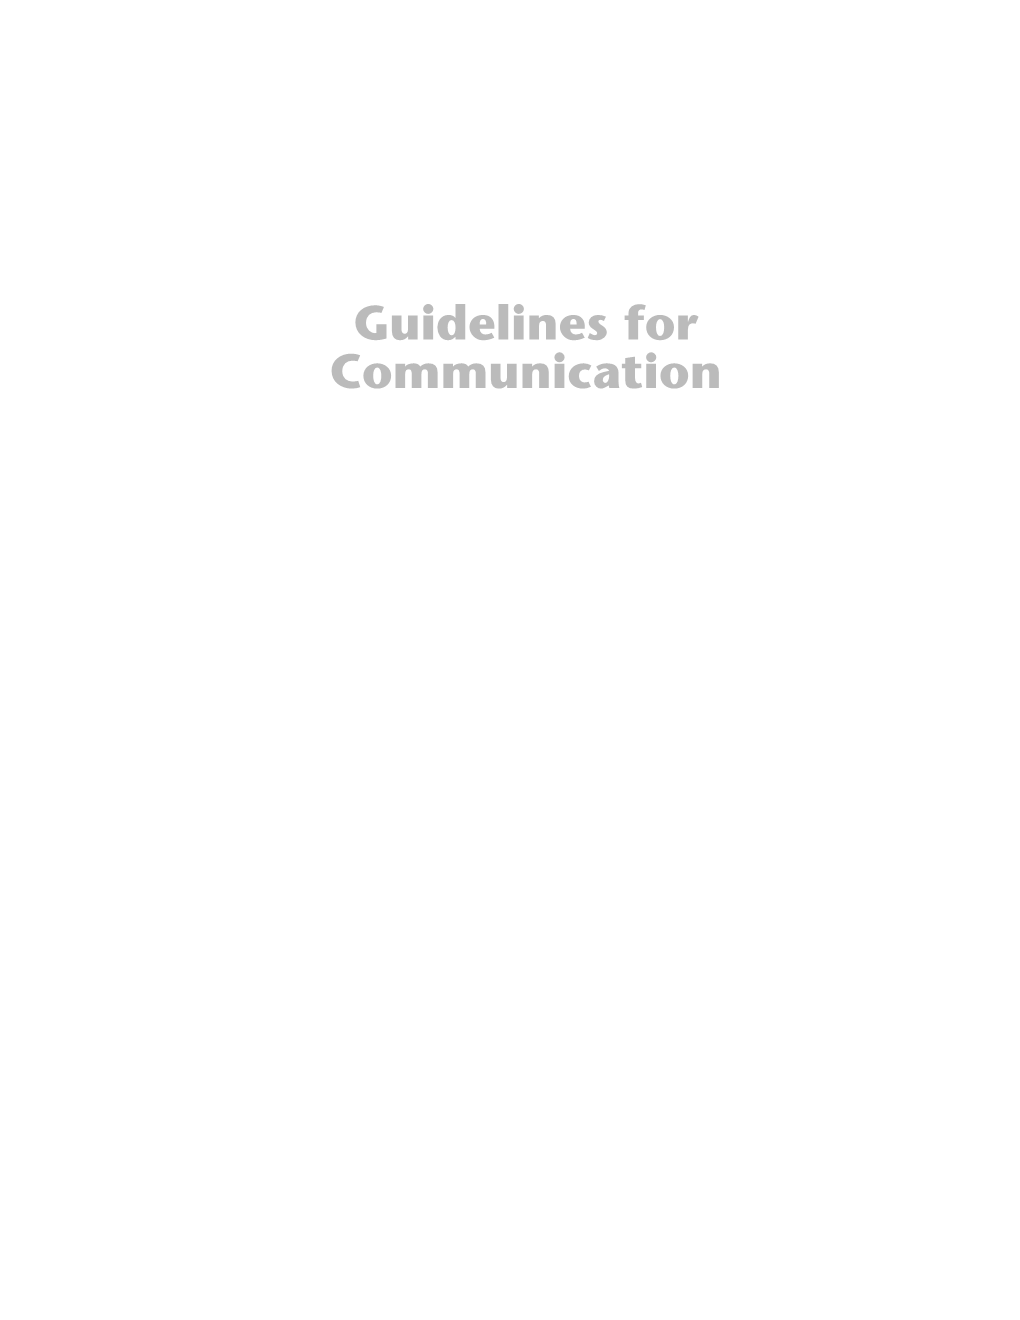 Guidelines for Communication